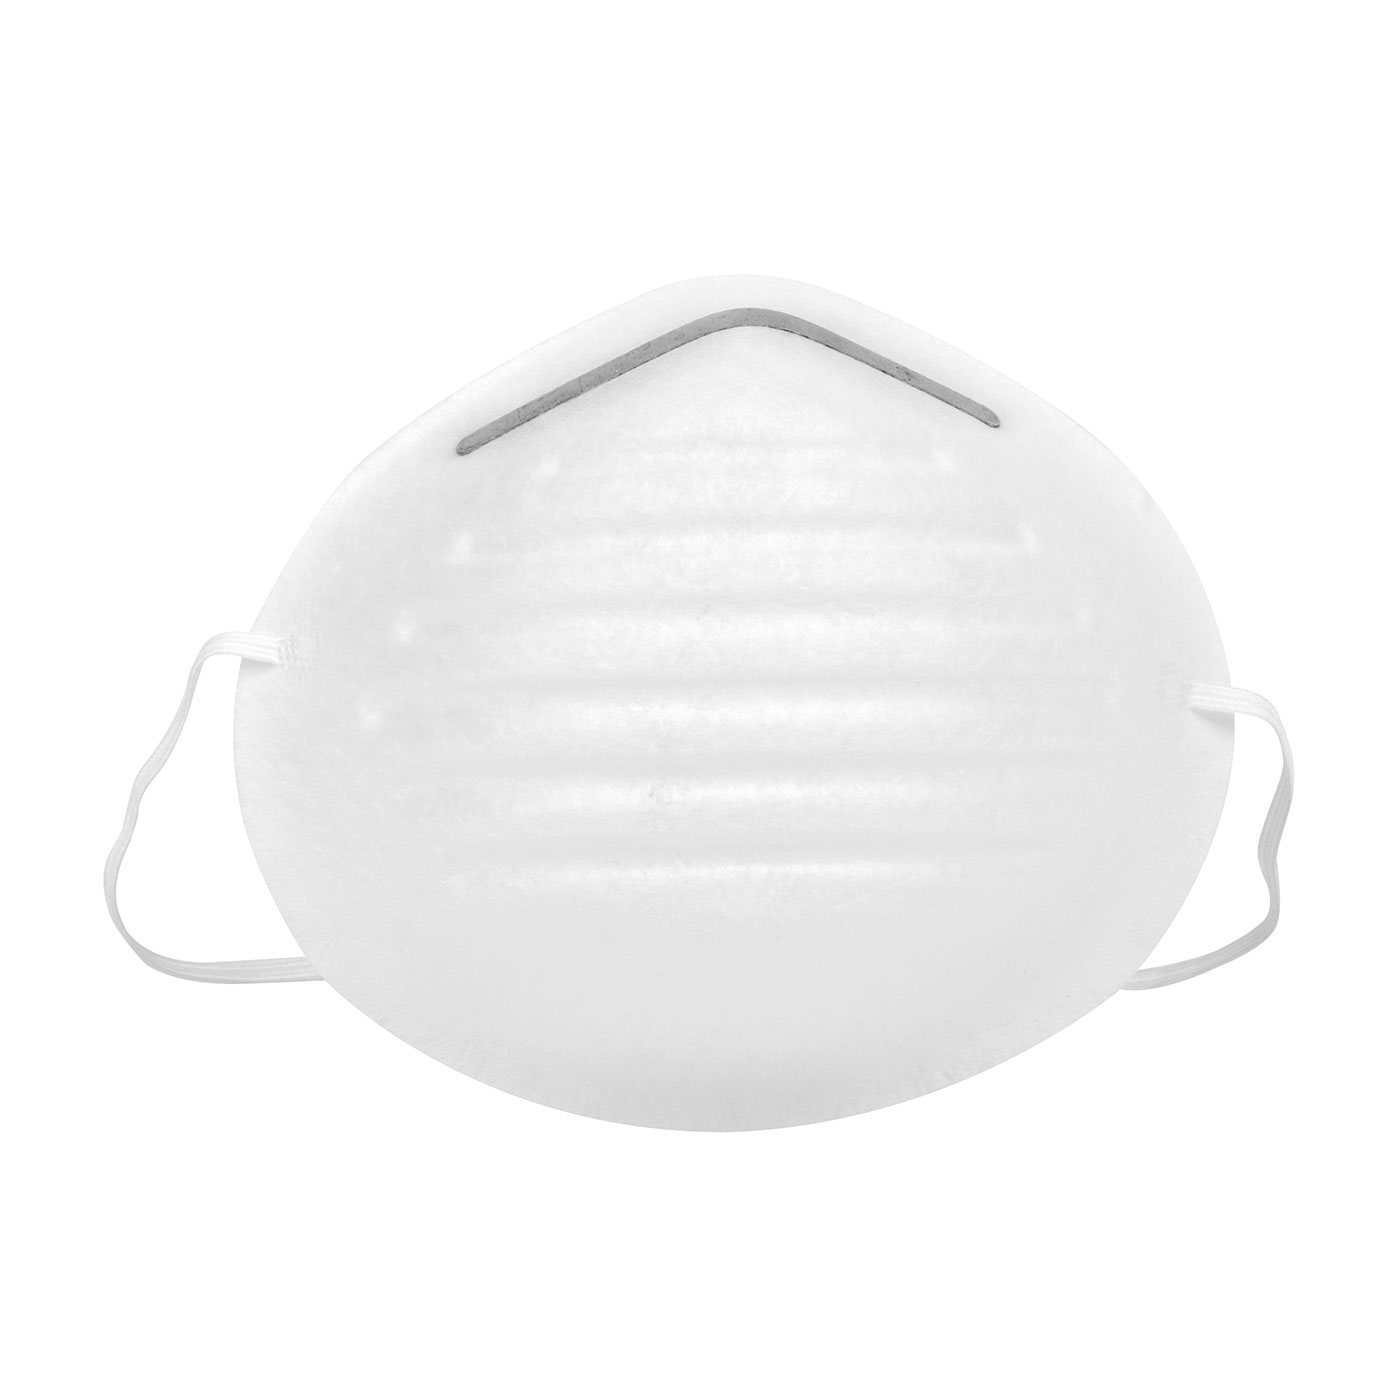 DISPOSIBLE MASK 102 CLINICAL